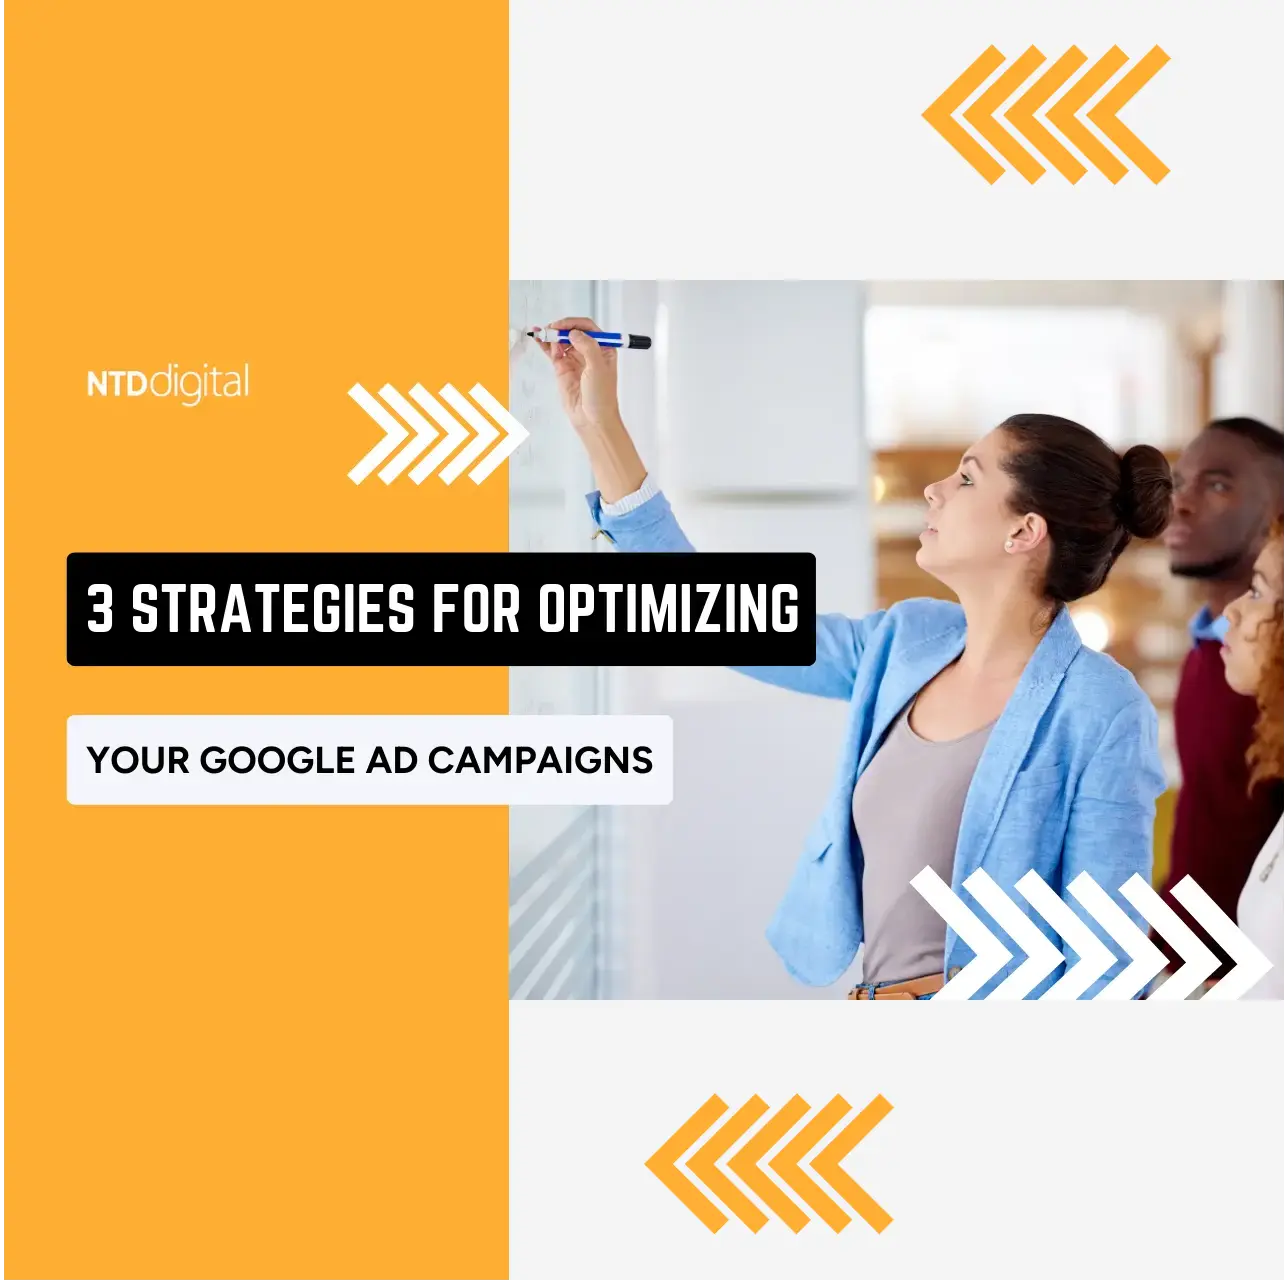 3 Strategies for Optimizing Your Google Ads Campaigns